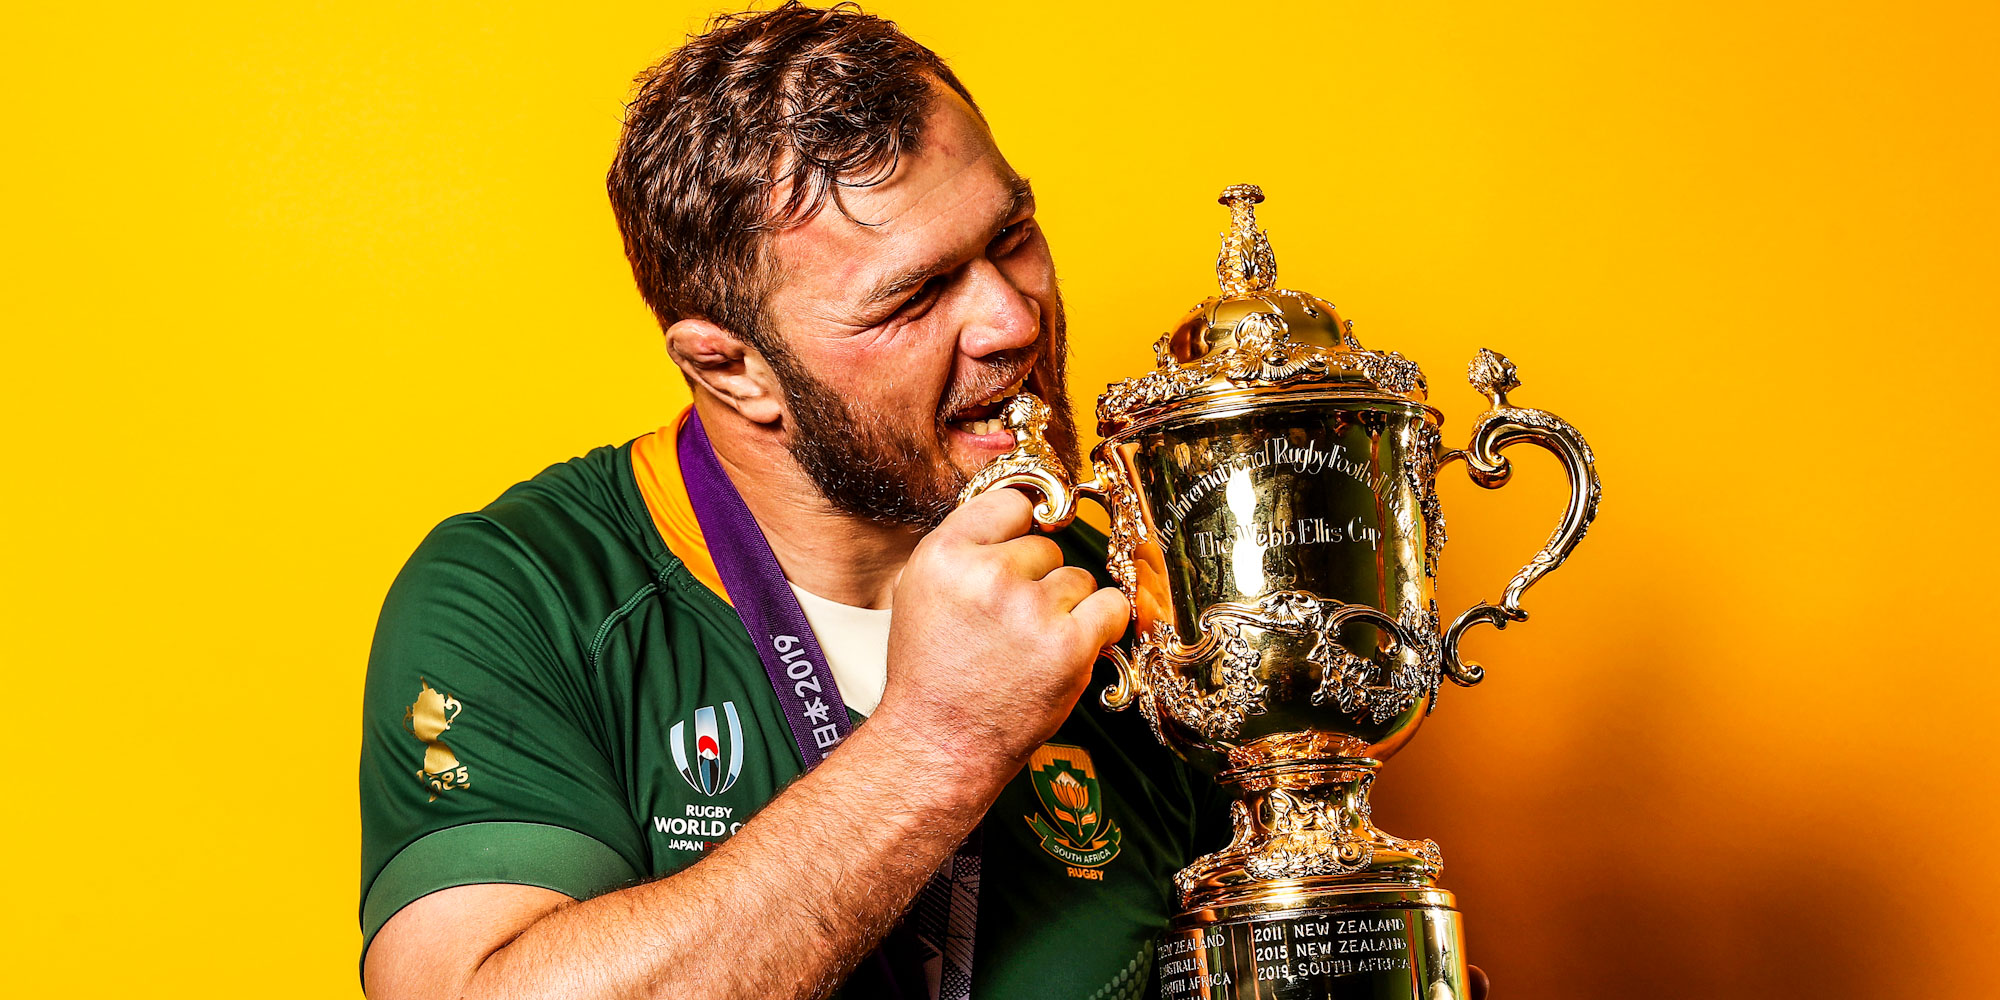 Vermeulen with the Webb Ellis Cup after the final in Japan in 2019.